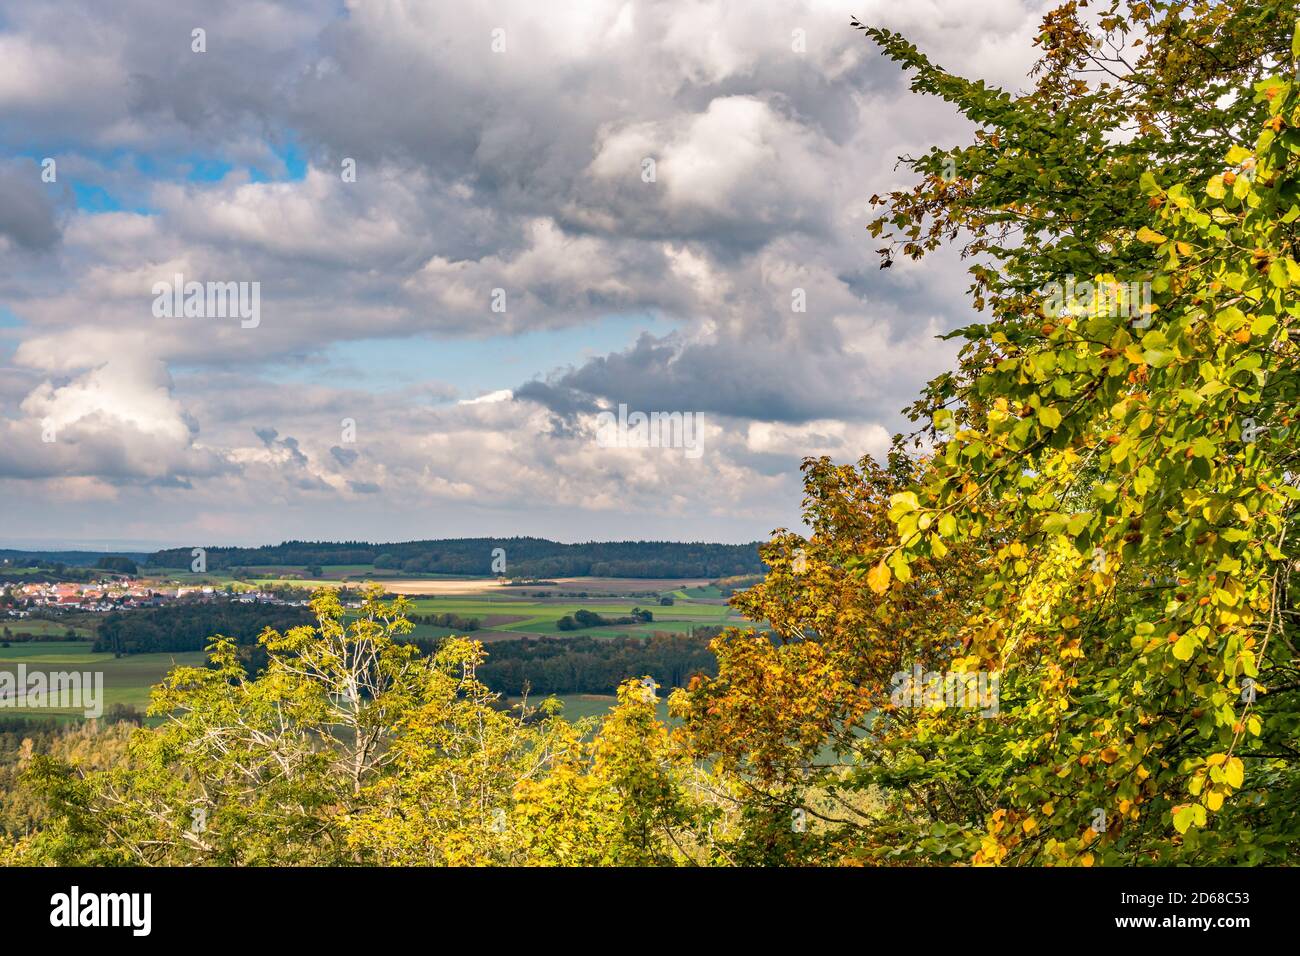 beautiful autumn hike in the colorful forest near wilhelmsdorf near ravensburg in upper swabia germany Stock Photo